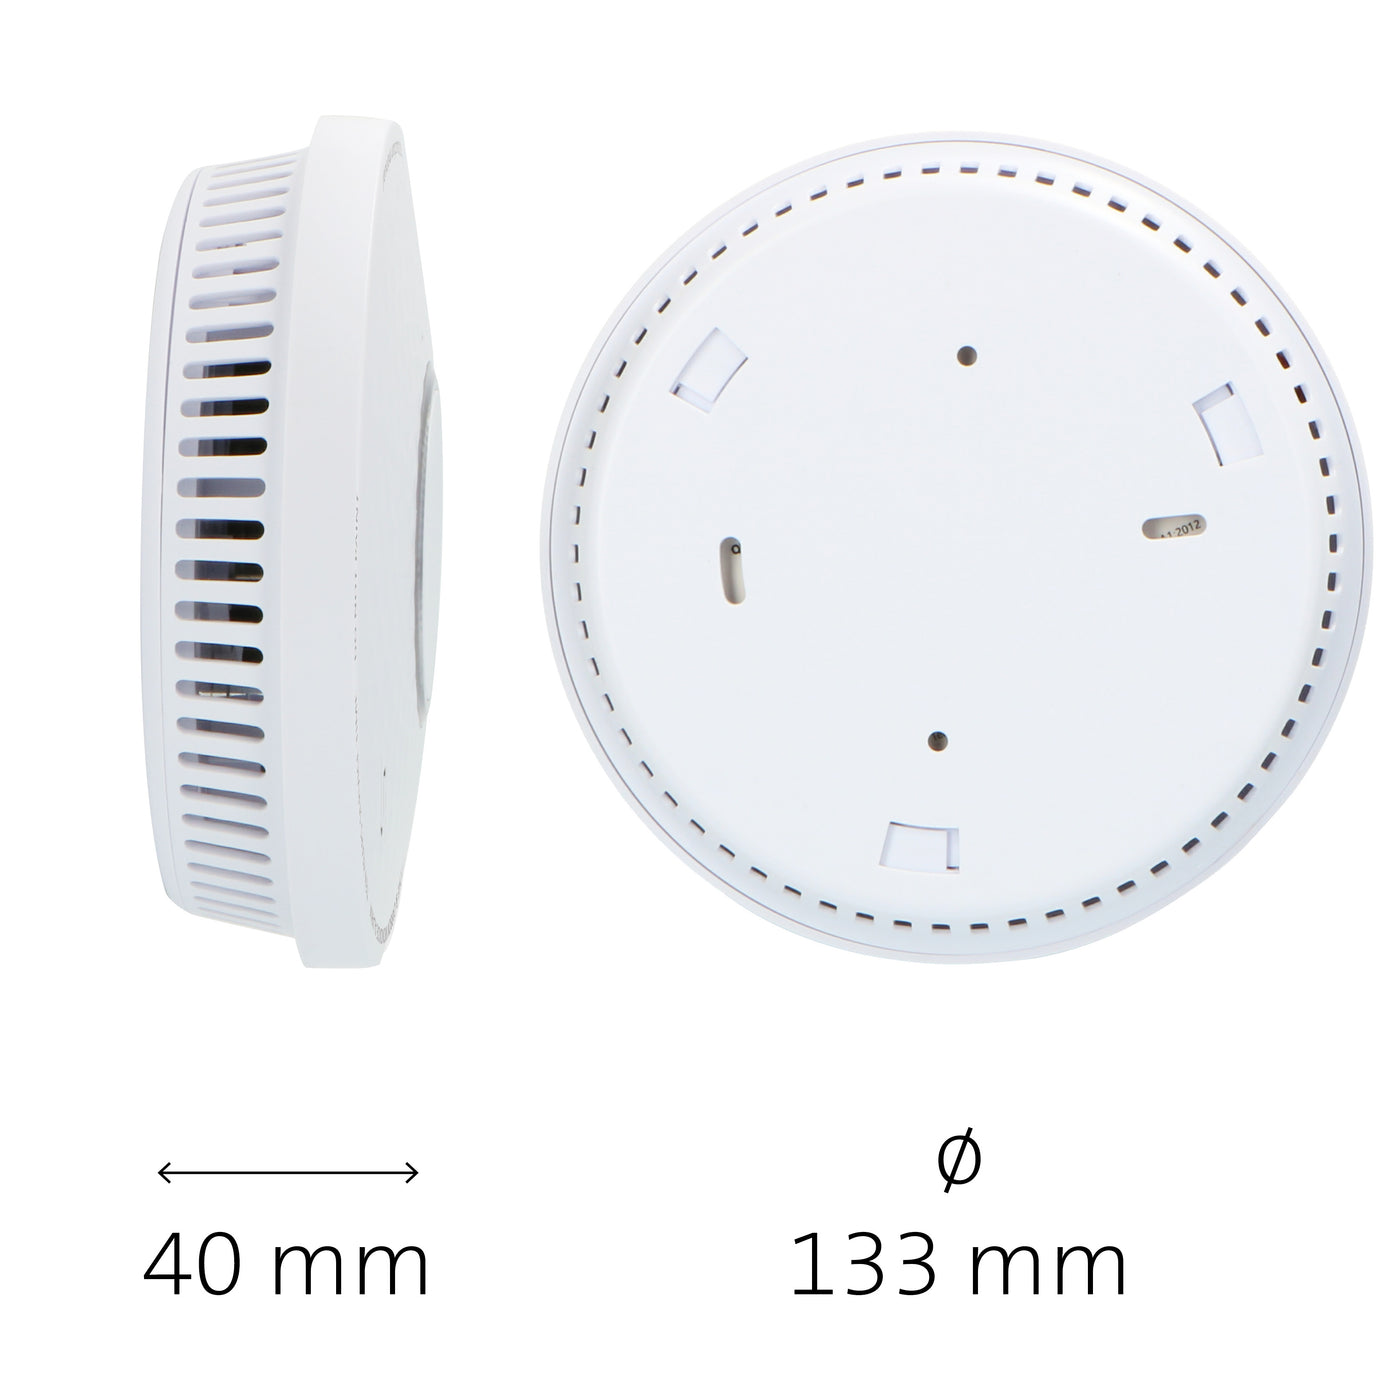 Alecto SCA-10 2x - Smoke and carbon monoxide alarm pack, 2 pack